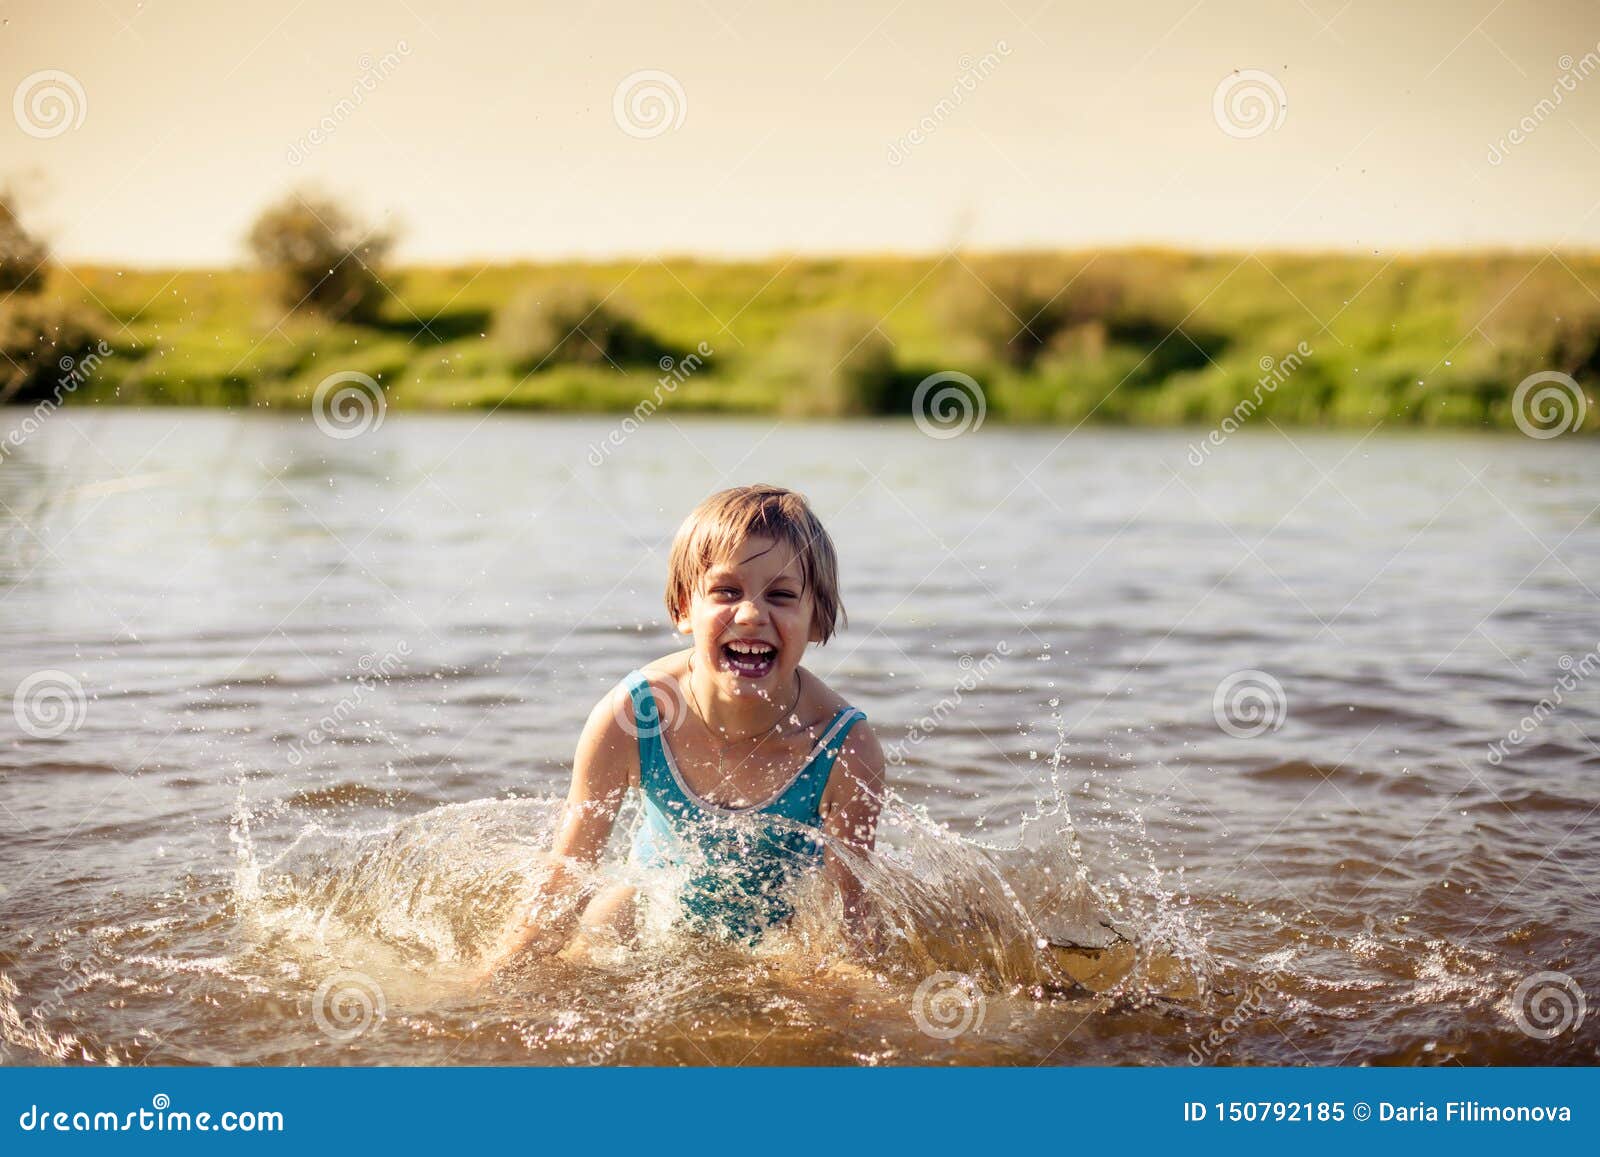 Girl Swimming in Warm River Stock Image - Image of young, swim: 150792185